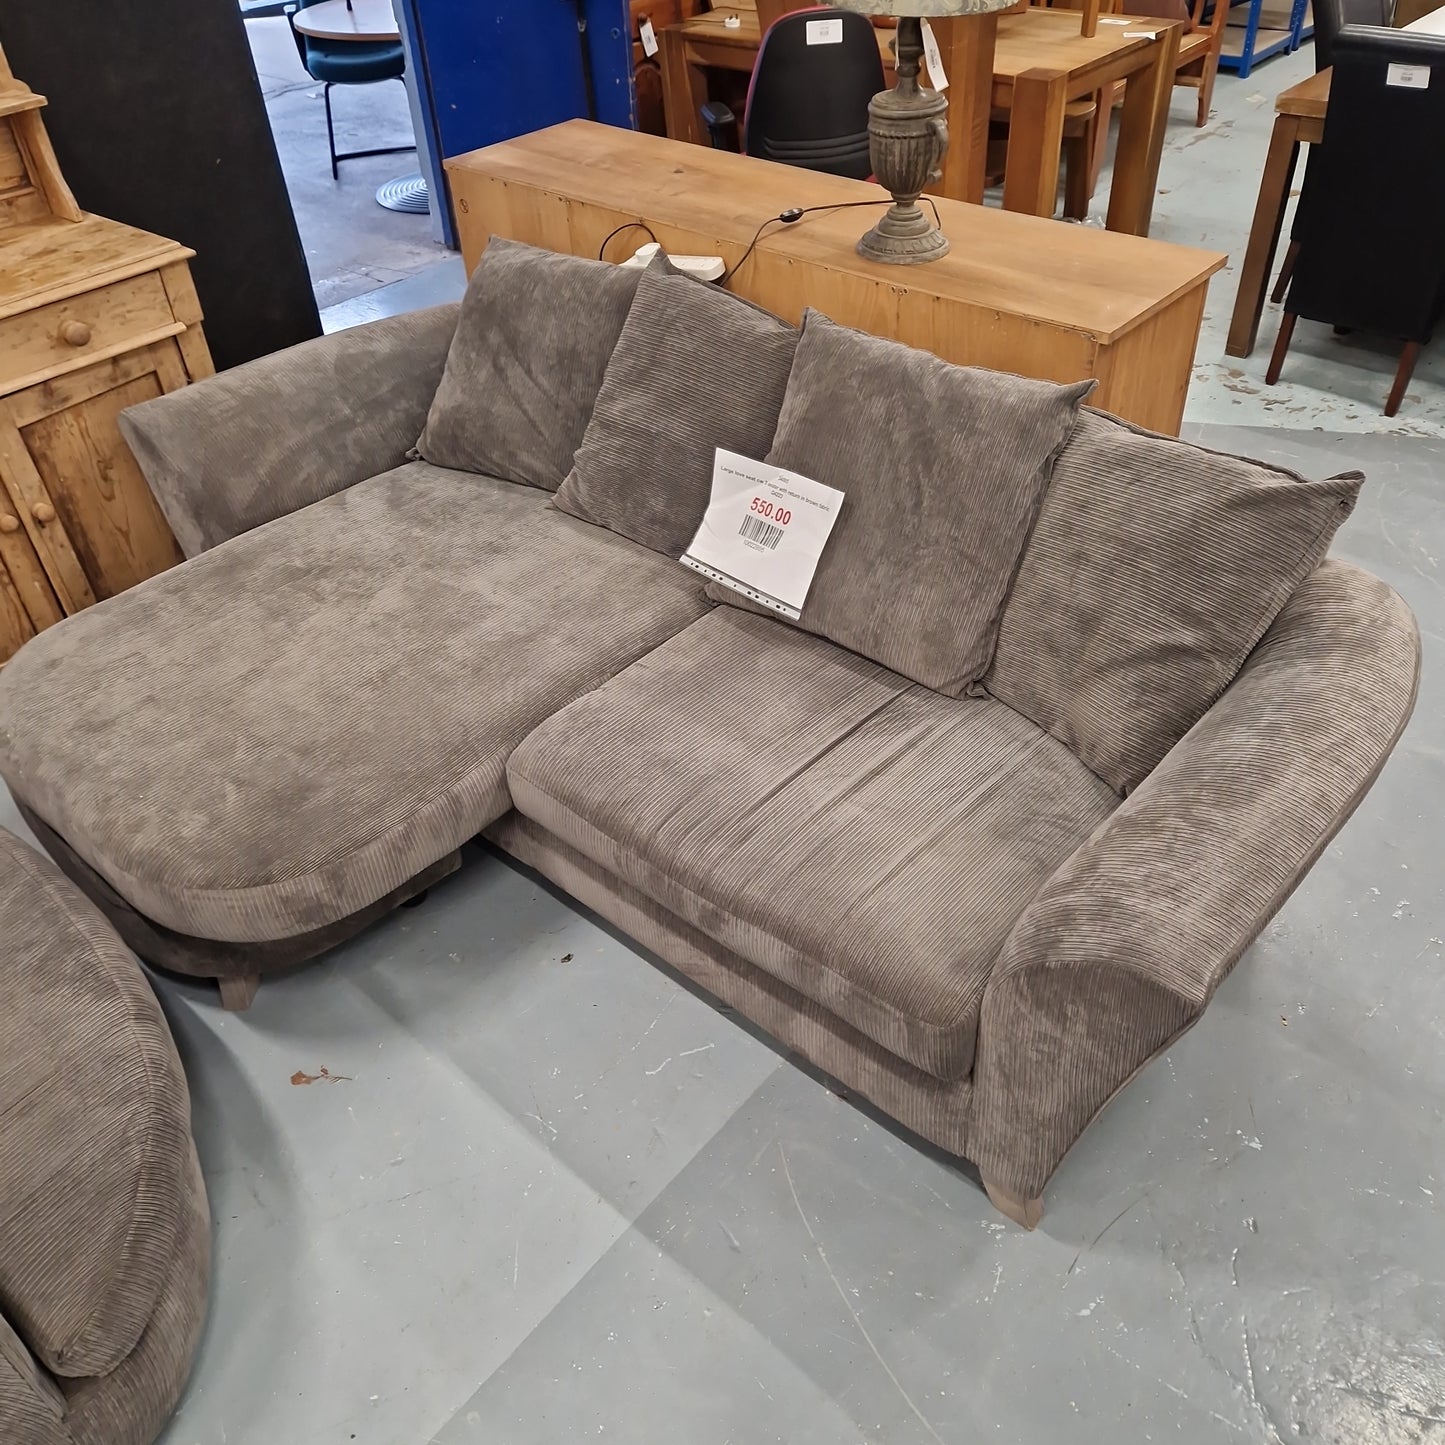 Large love seat cw 3 seater with return in brown fabric%A0 Q4223
WAS €550
NOW €475